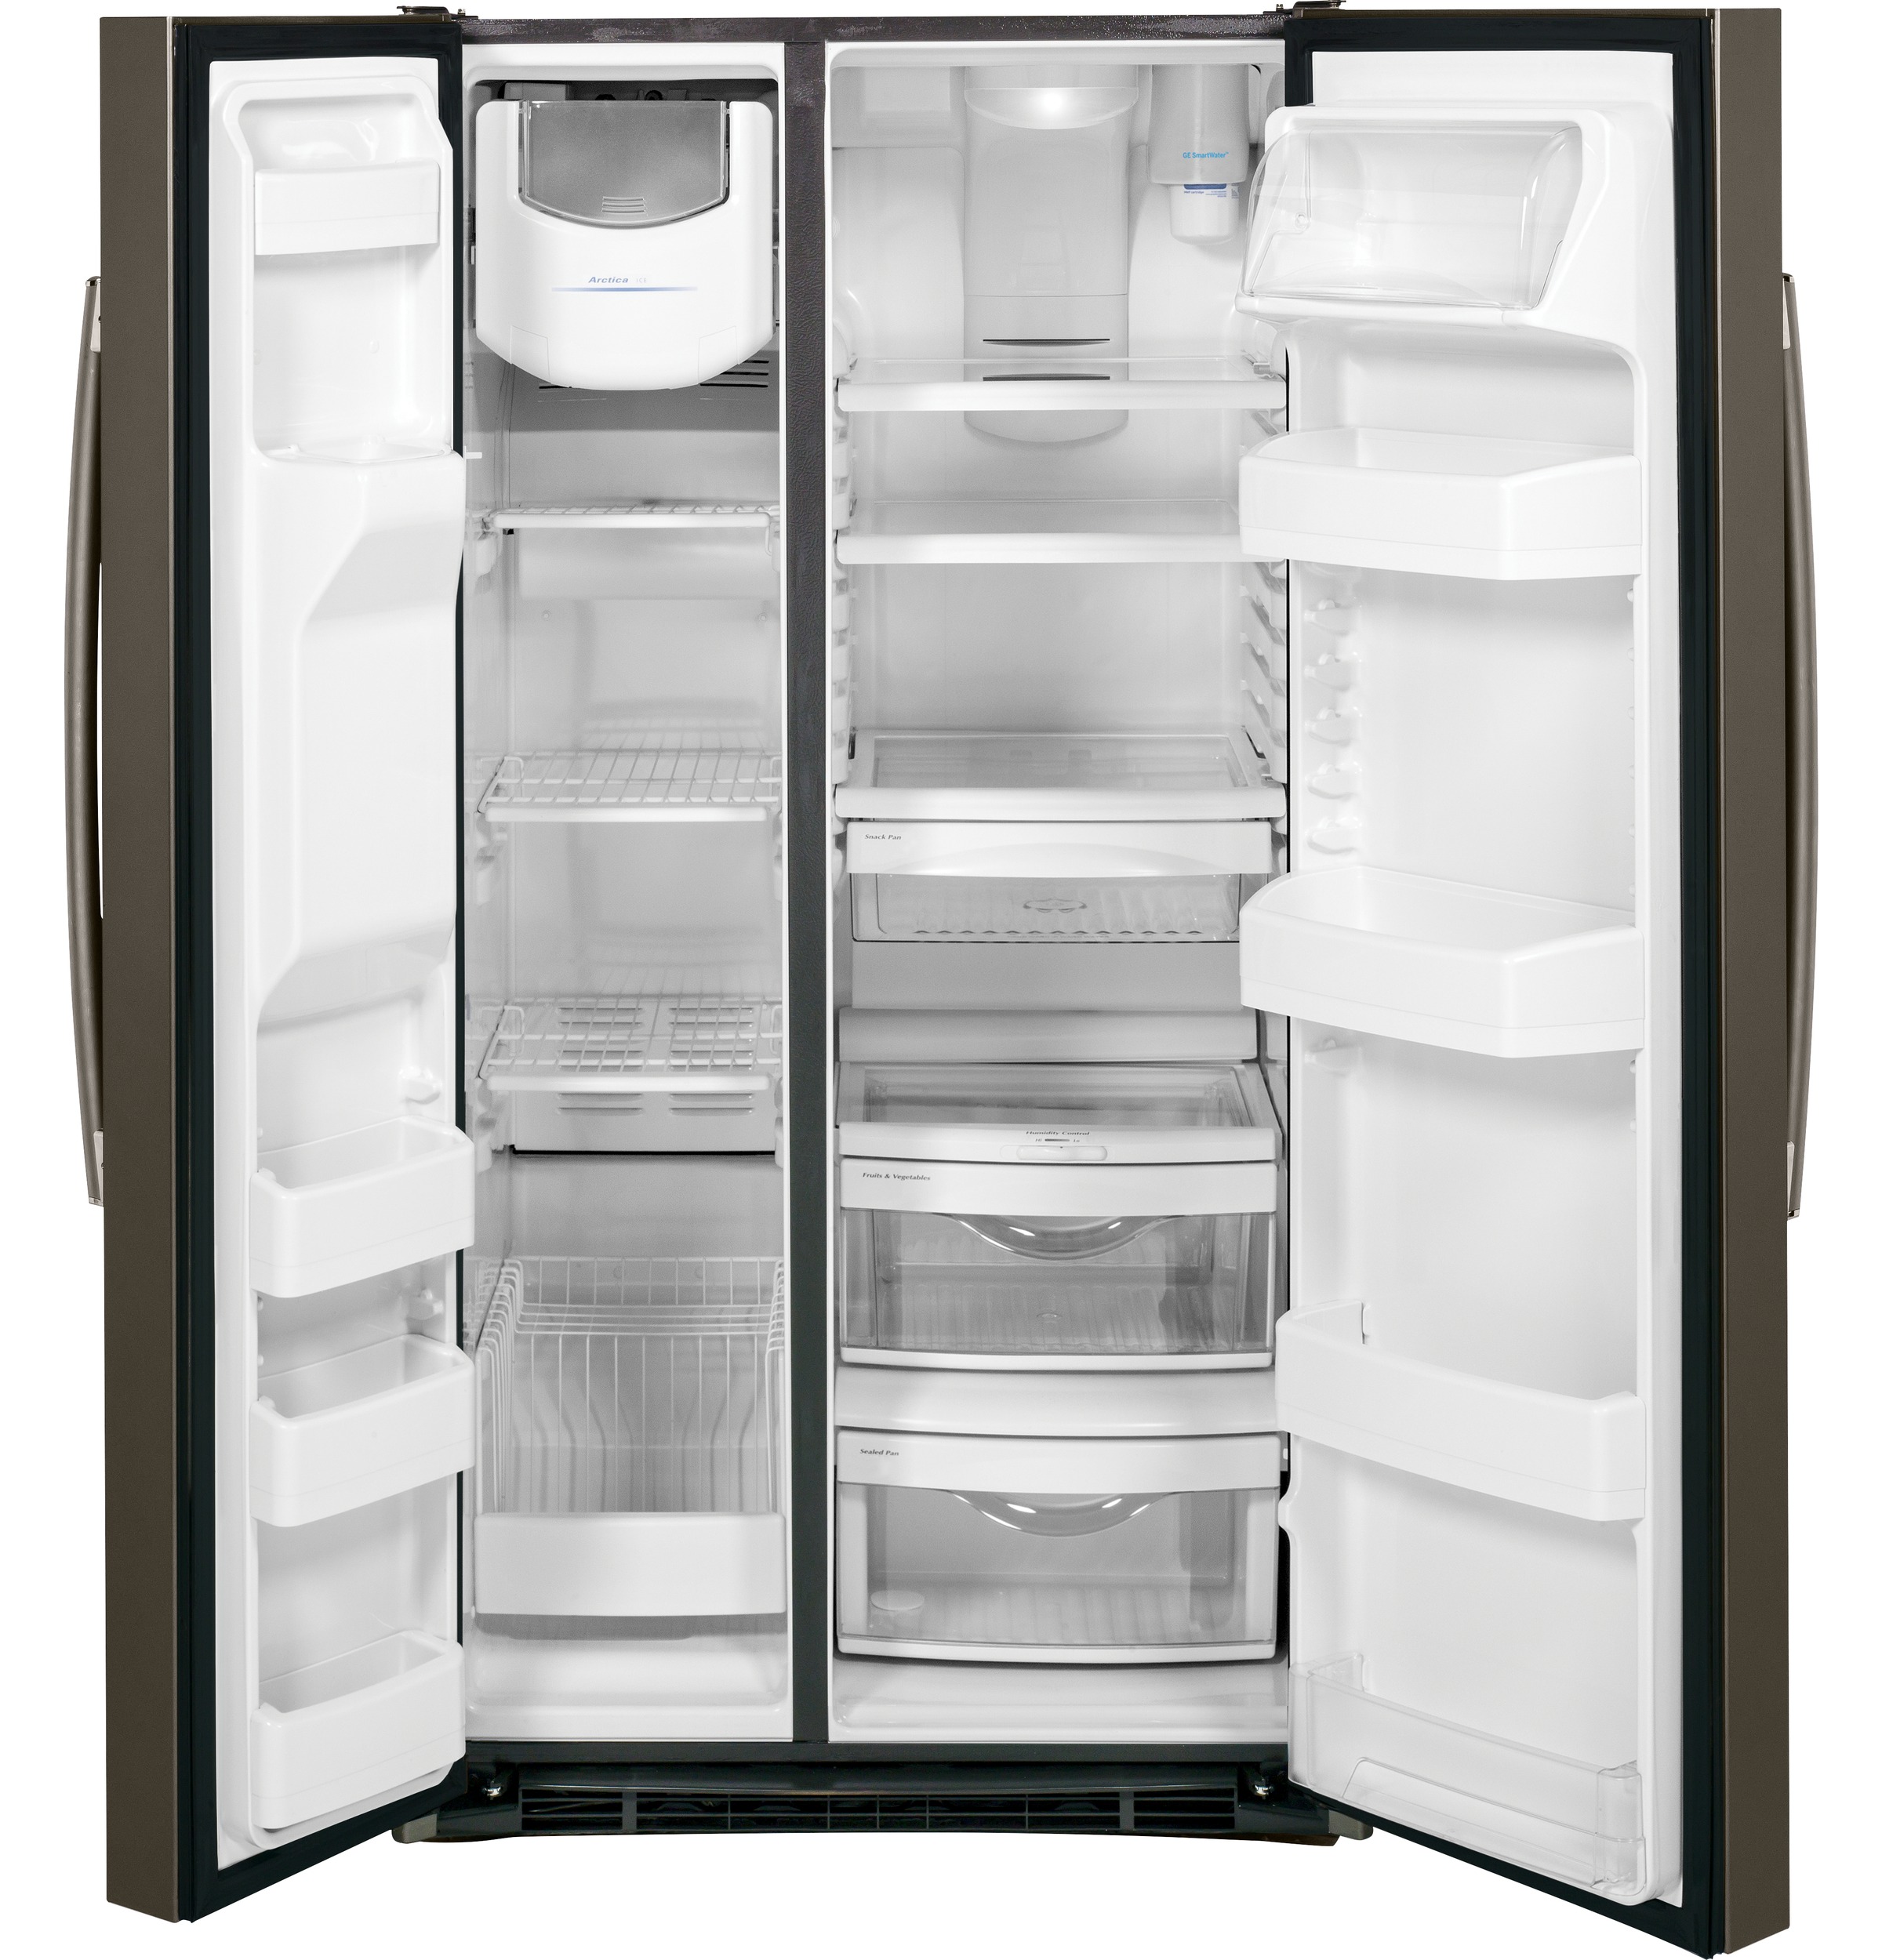 GE 25.4 Cu. Ft. SidebySide Refrigerator with ThrutheDoor Ice and